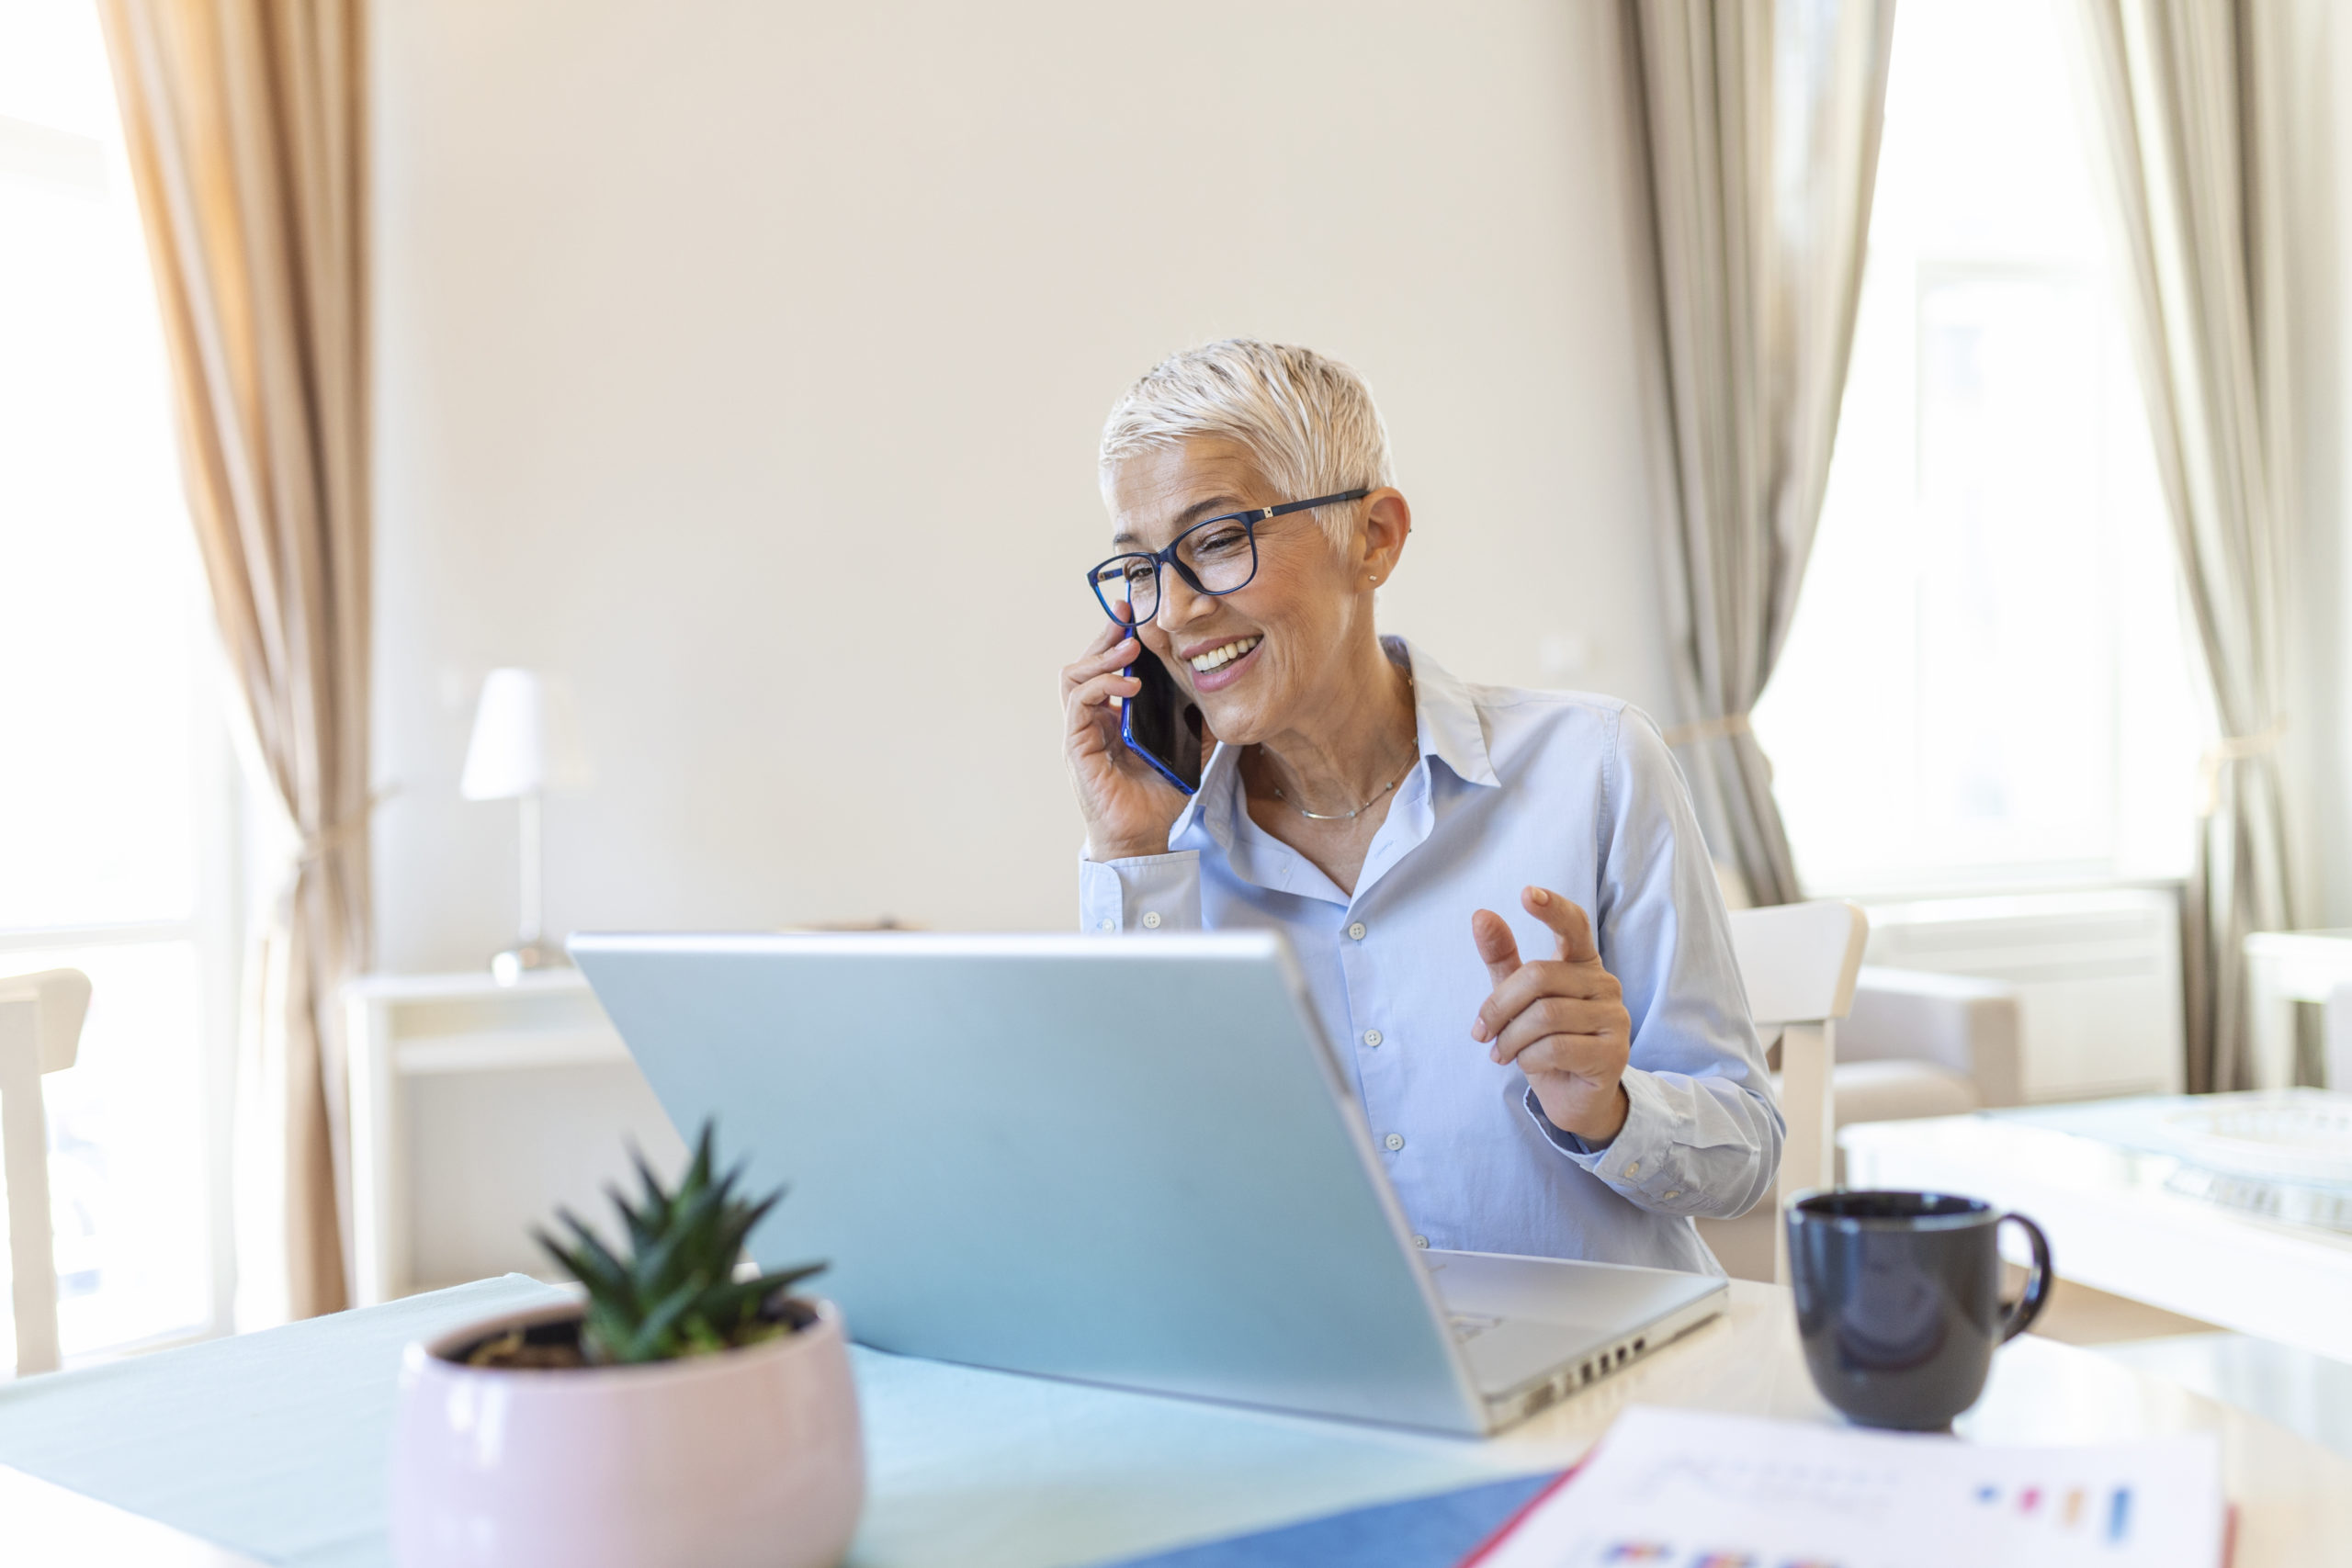 Smiling mature beautiful business woman with white hair working on laptop in bright modern home office.